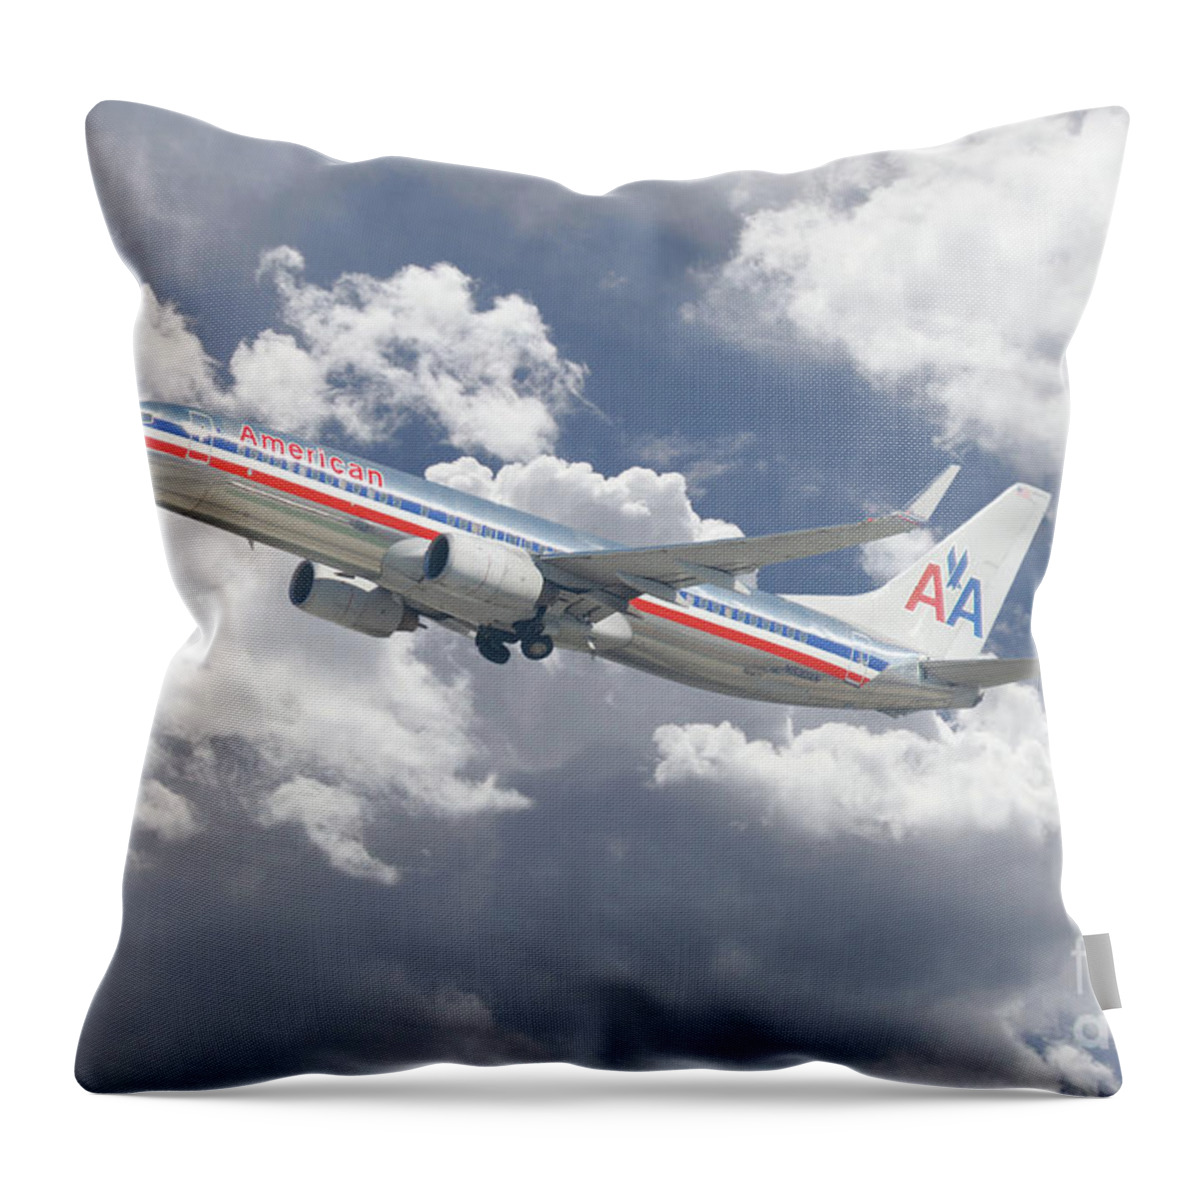 American Airlines Throw Pillow featuring the digital art American Airlines Boeing 737 by Airpower Art